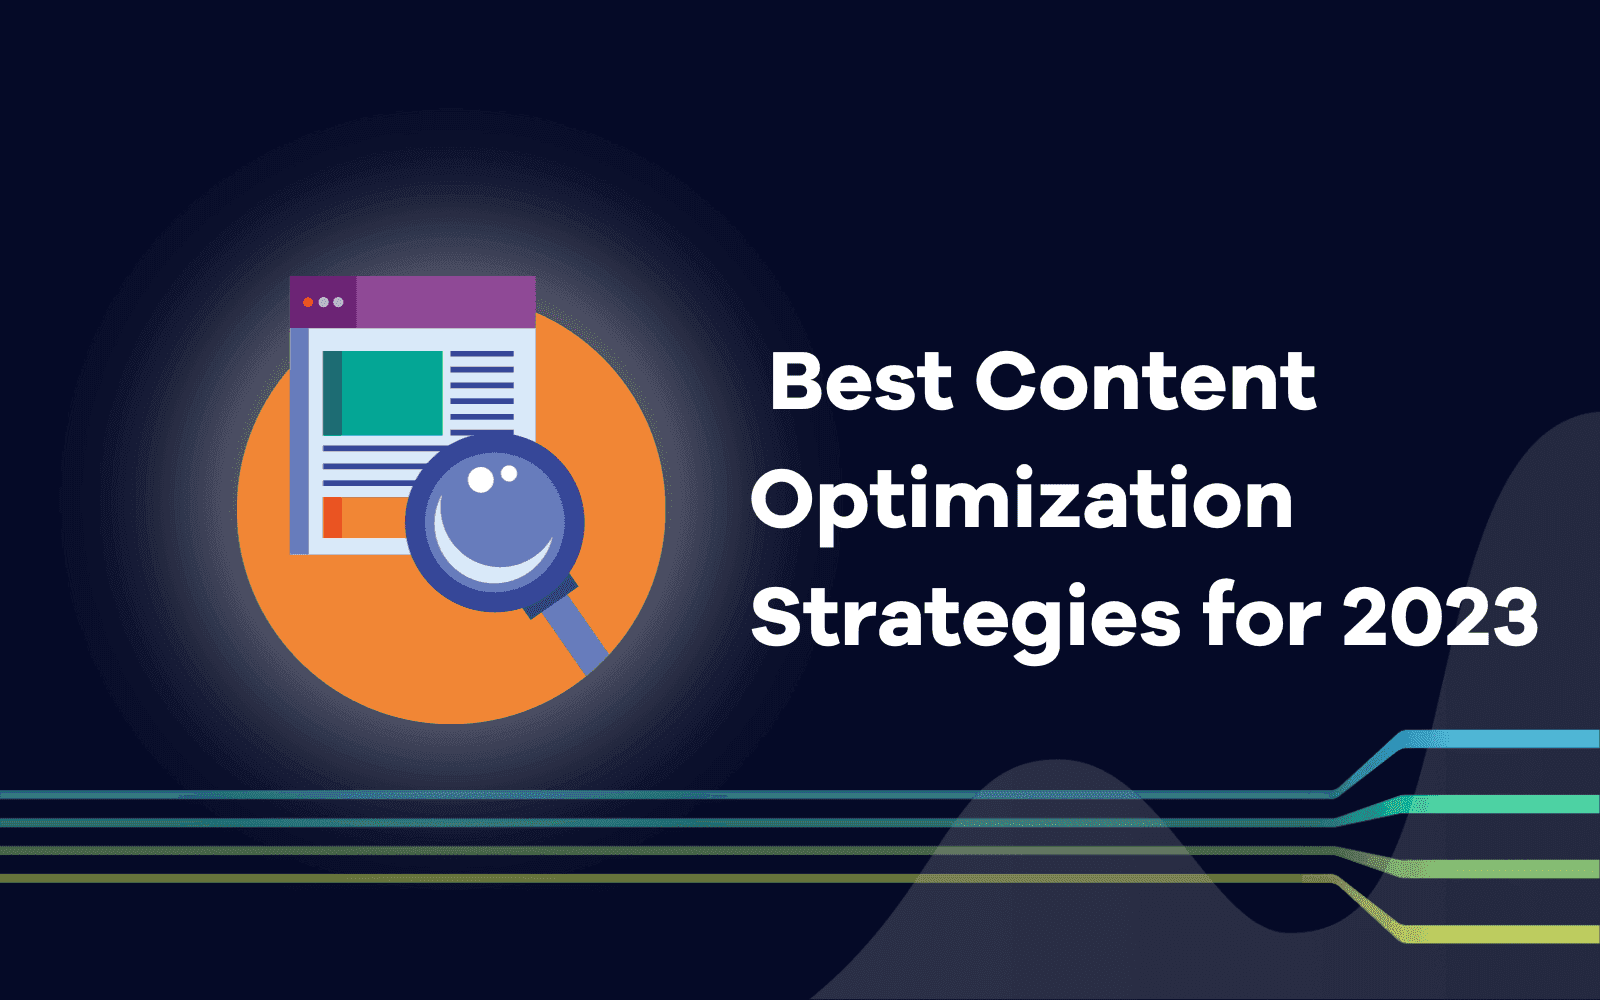 Best Content Optimization Strategies for 2023